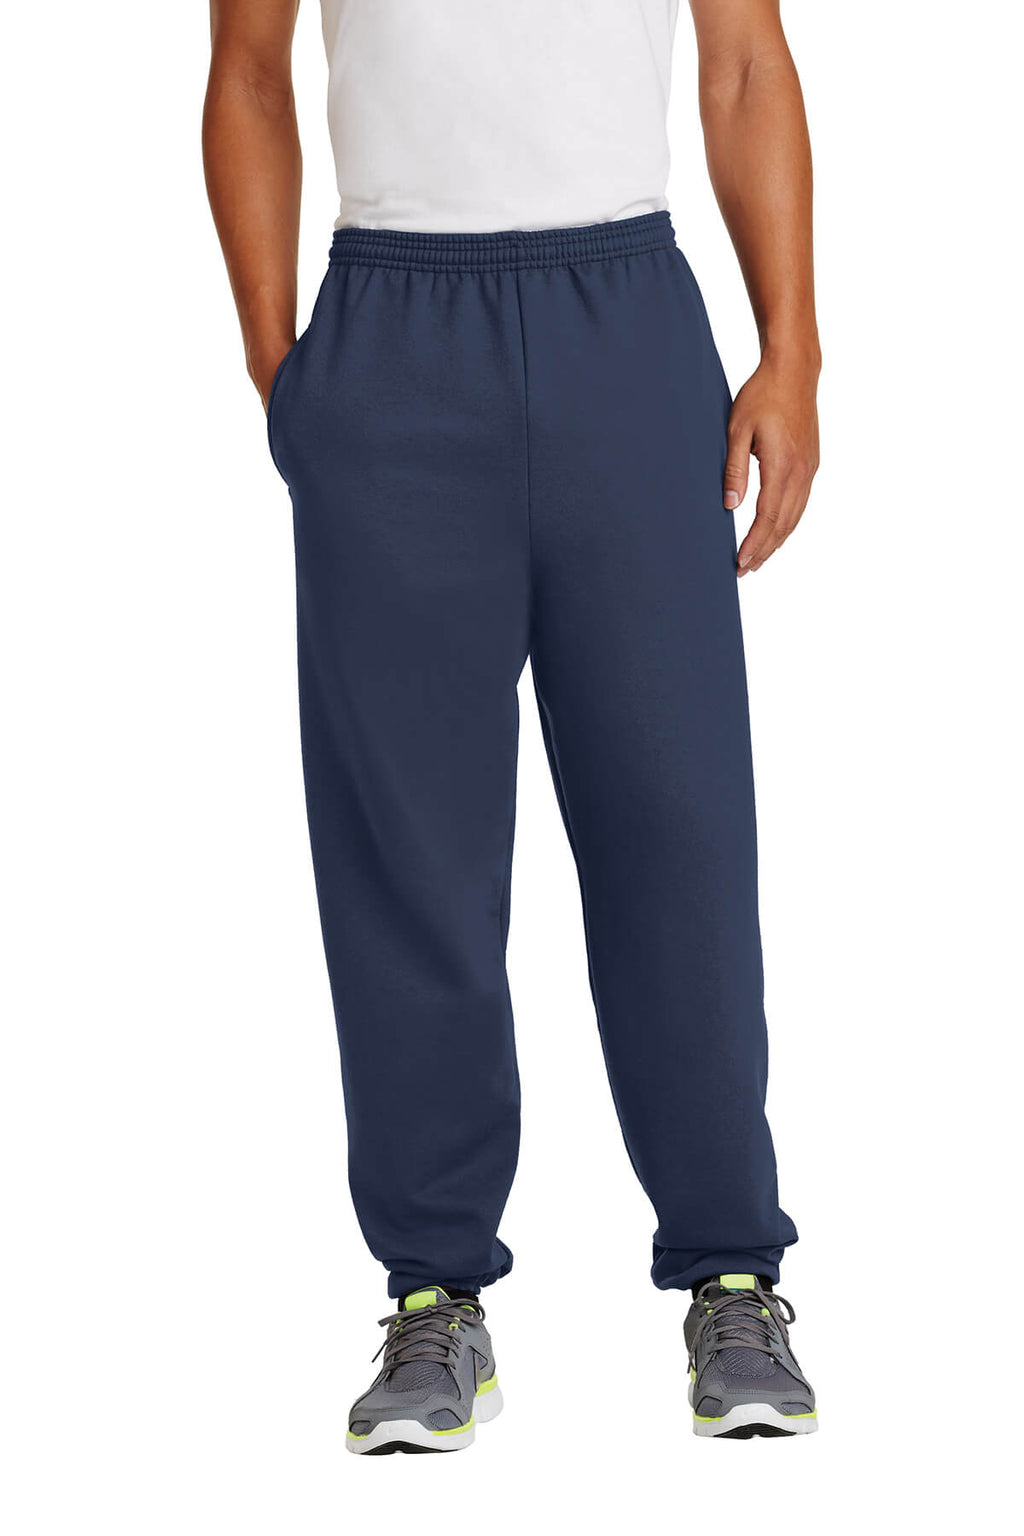 Port & Company Ultimate Sweatpant With Pockets-2